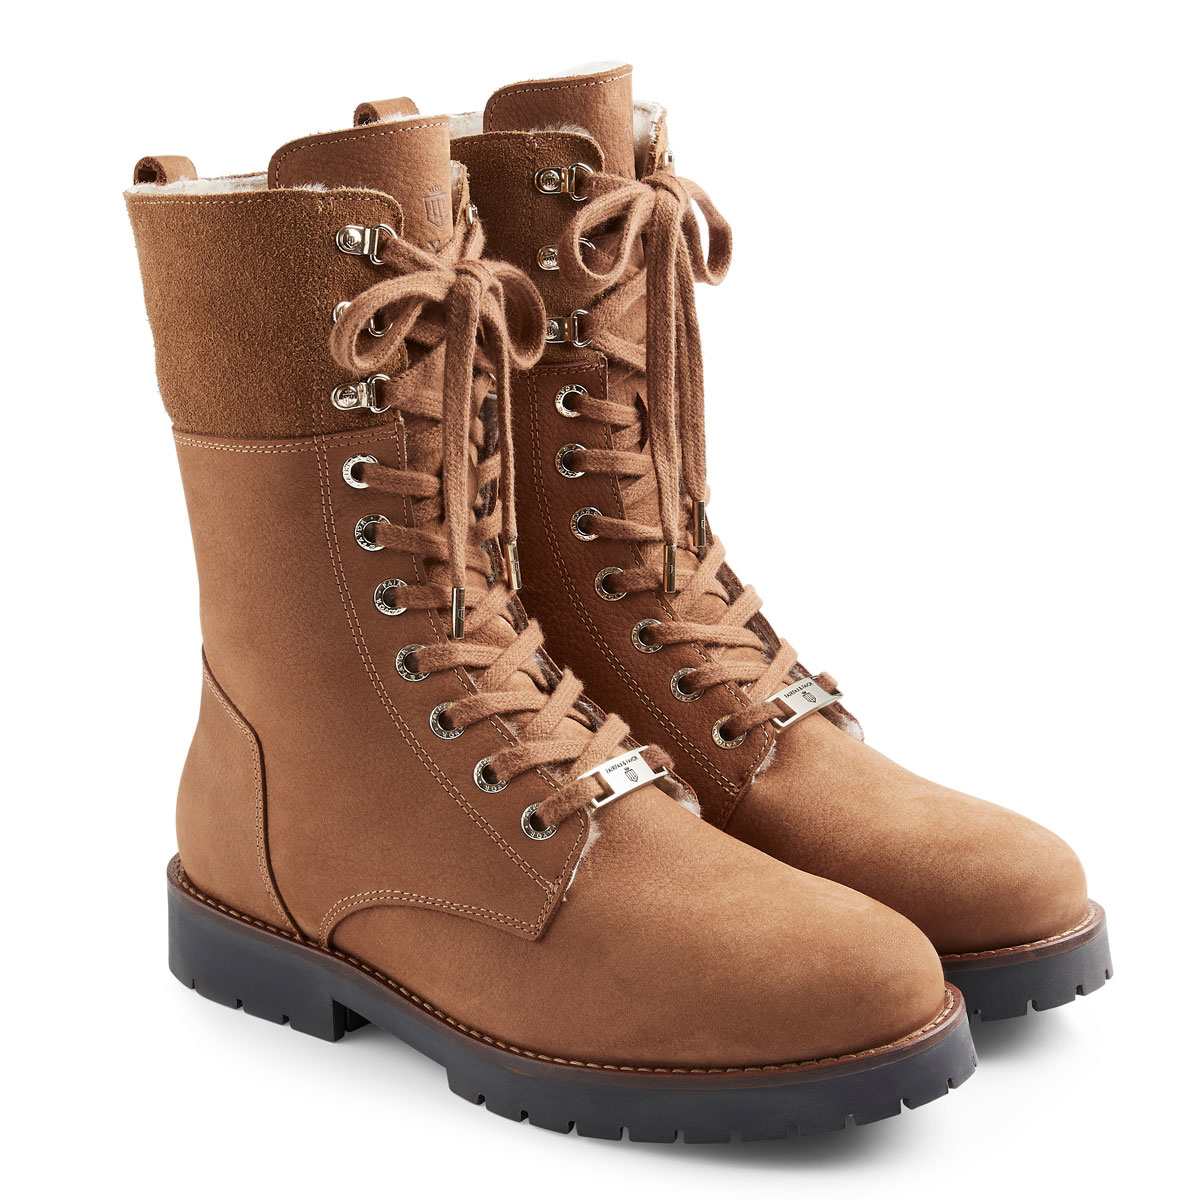 Fairfax and Favor Anglesey Ladies Combat Boots - Cognac Nubuck